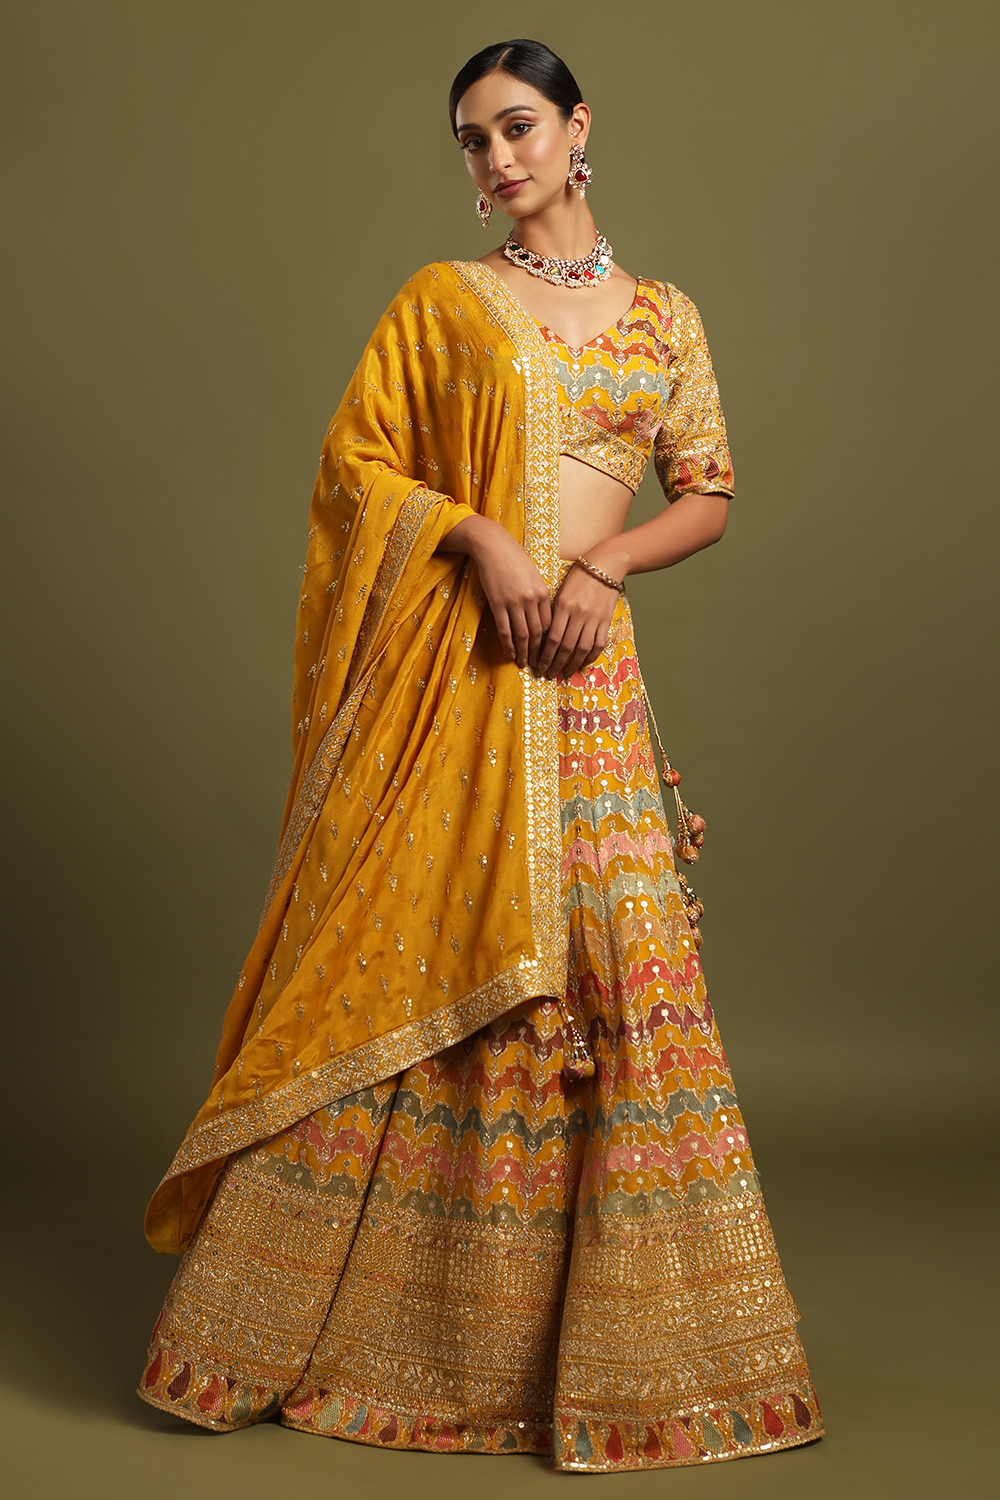 Vibrant Patchwork Lehengas We Are Crushing On Right Now